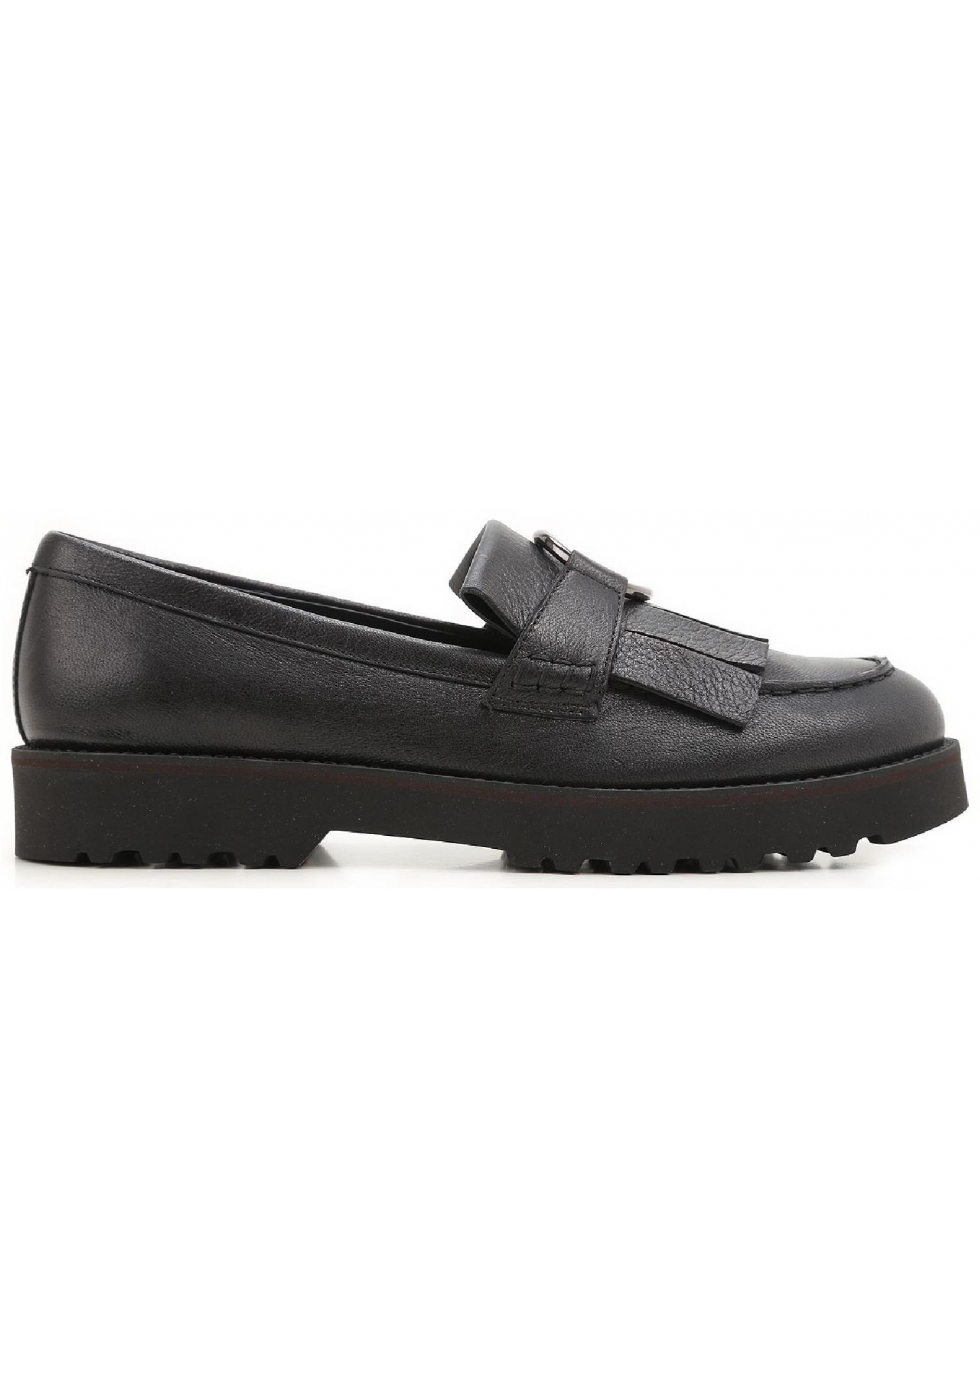 Hogan women's black leather loafers with fringe - Italian Boutique